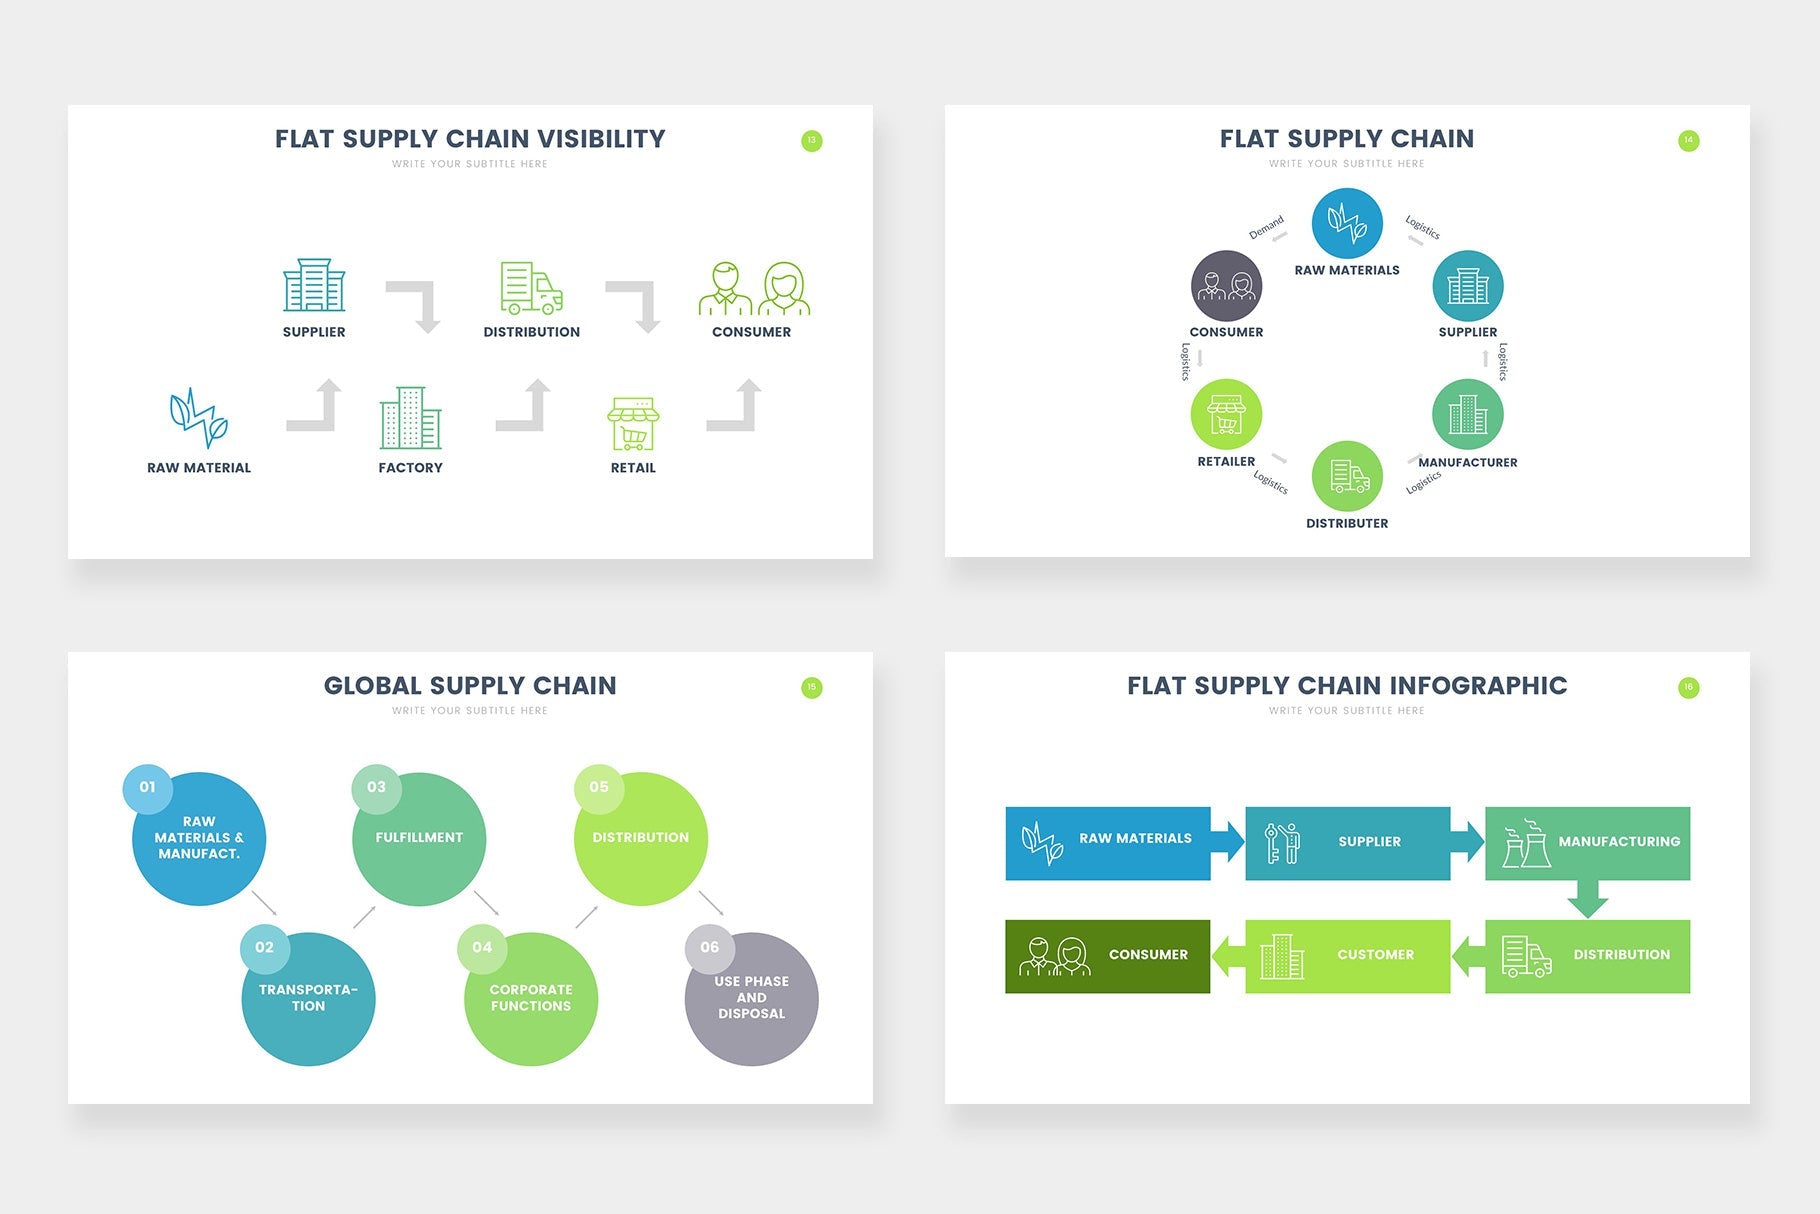 Supply Chain Infographic templates